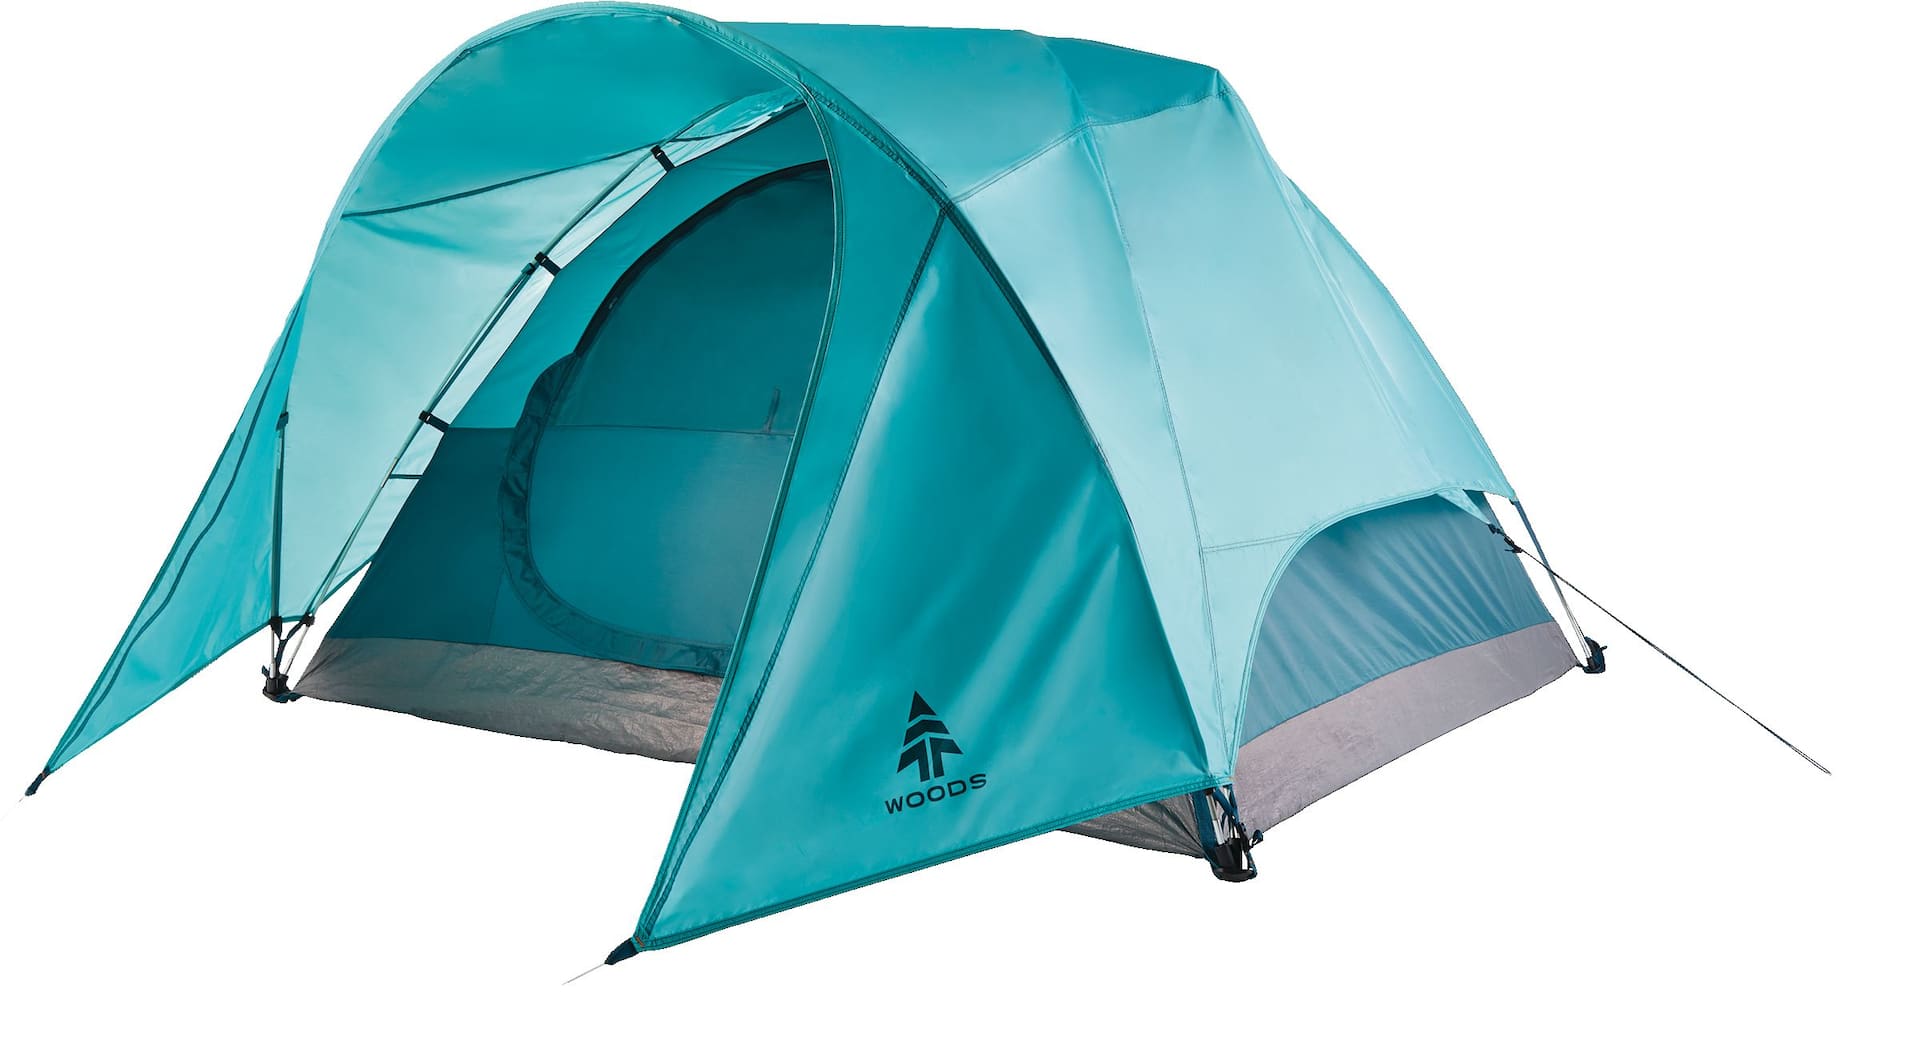 Outdoor Camping Dome Tent - Green – Betel Canada